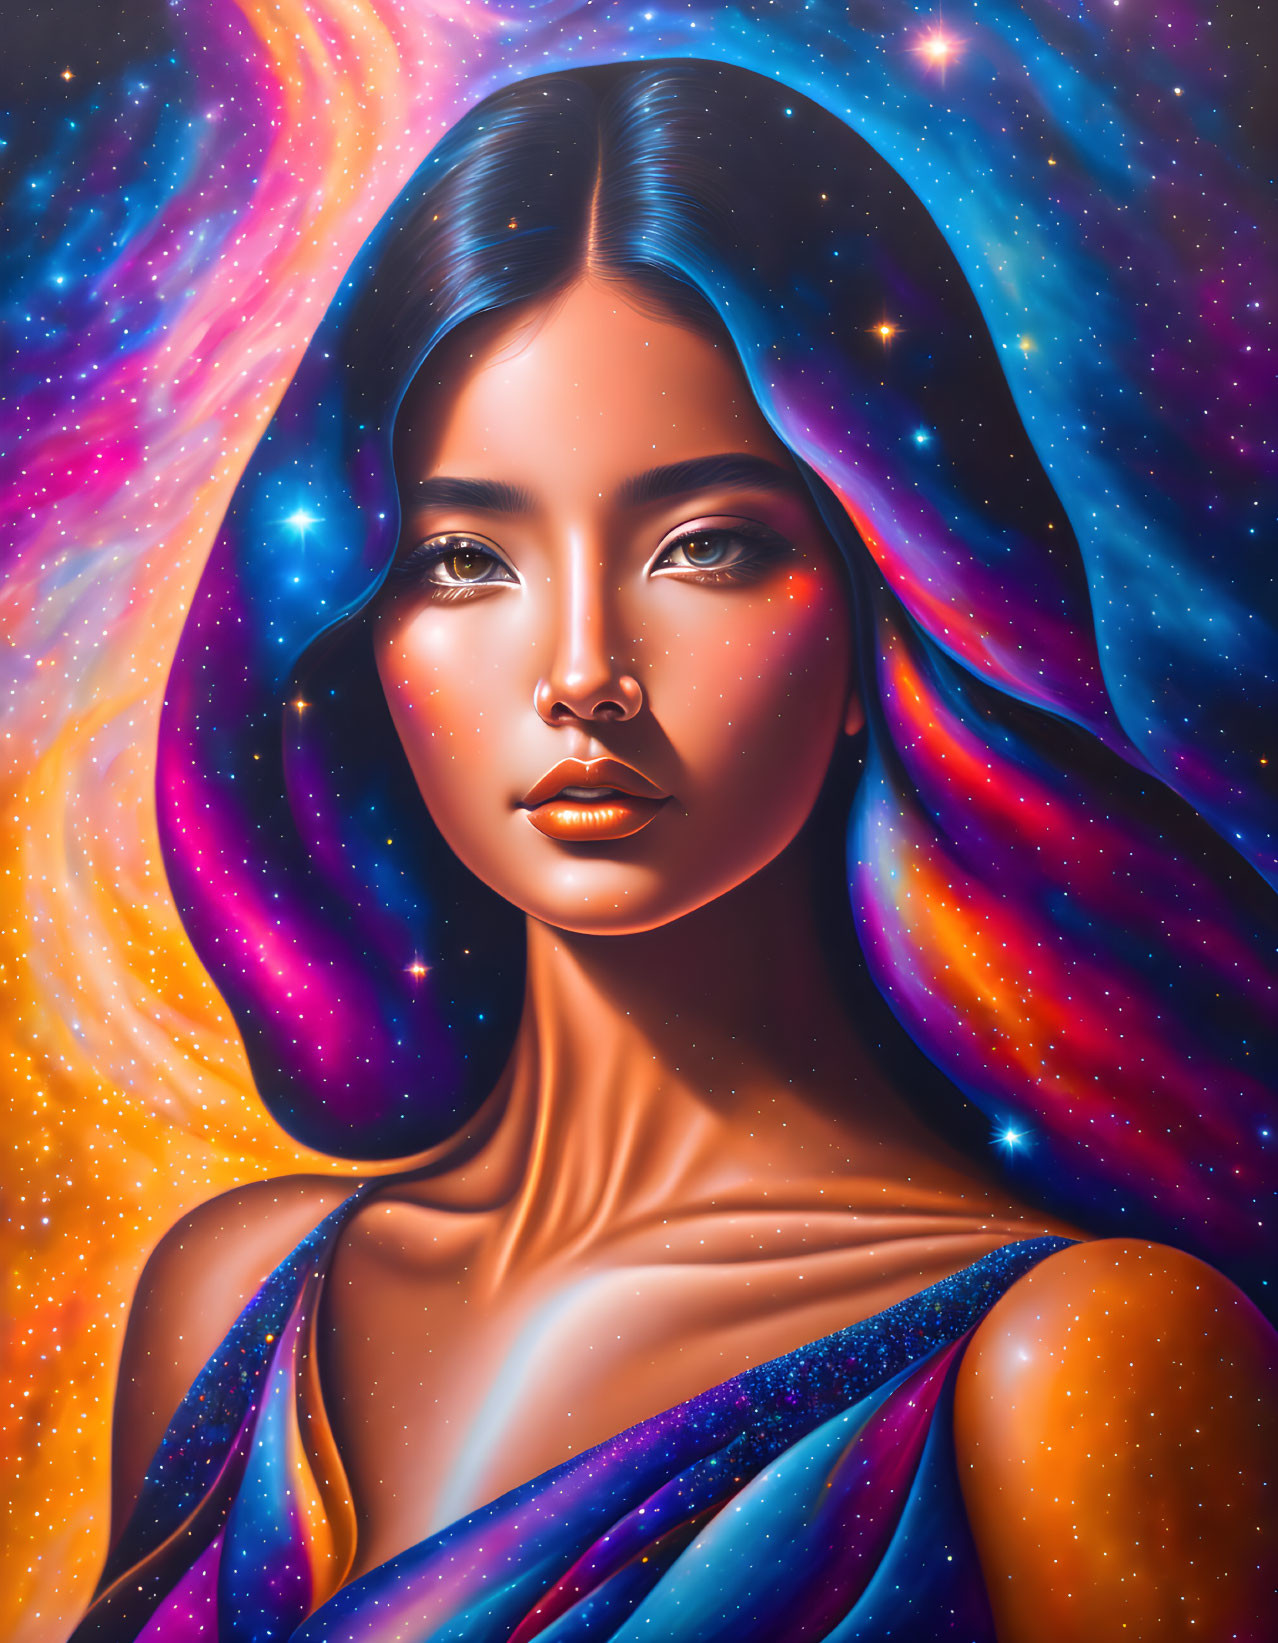 Cosmic-themed digital portrait of a woman with vibrant colors